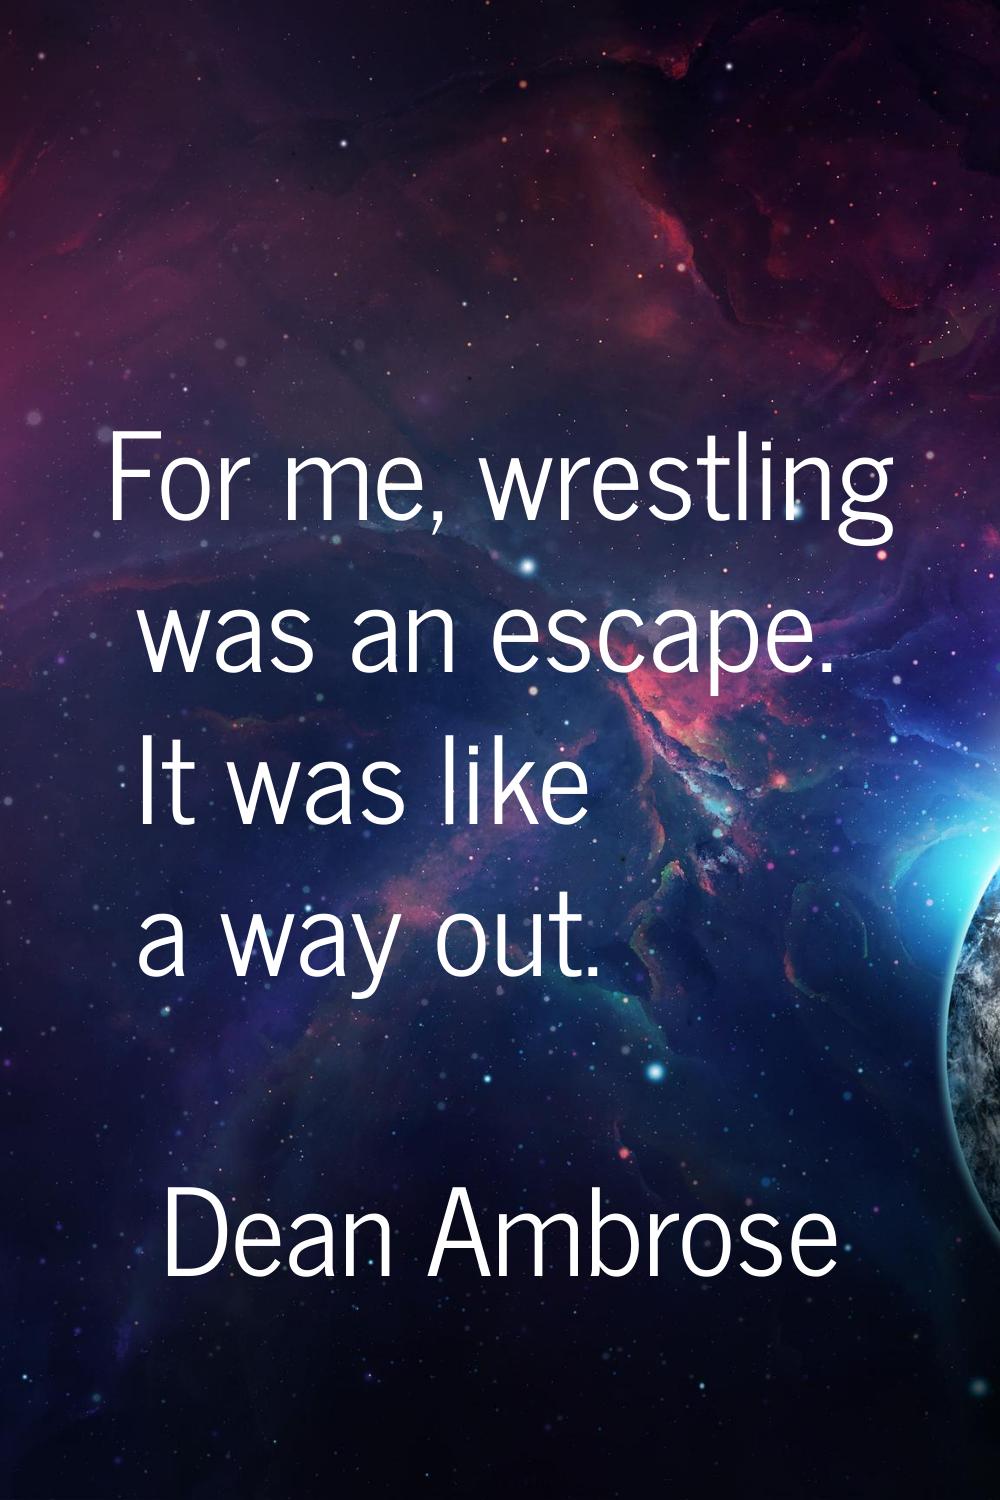 For me, wrestling was an escape. It was like a way out.